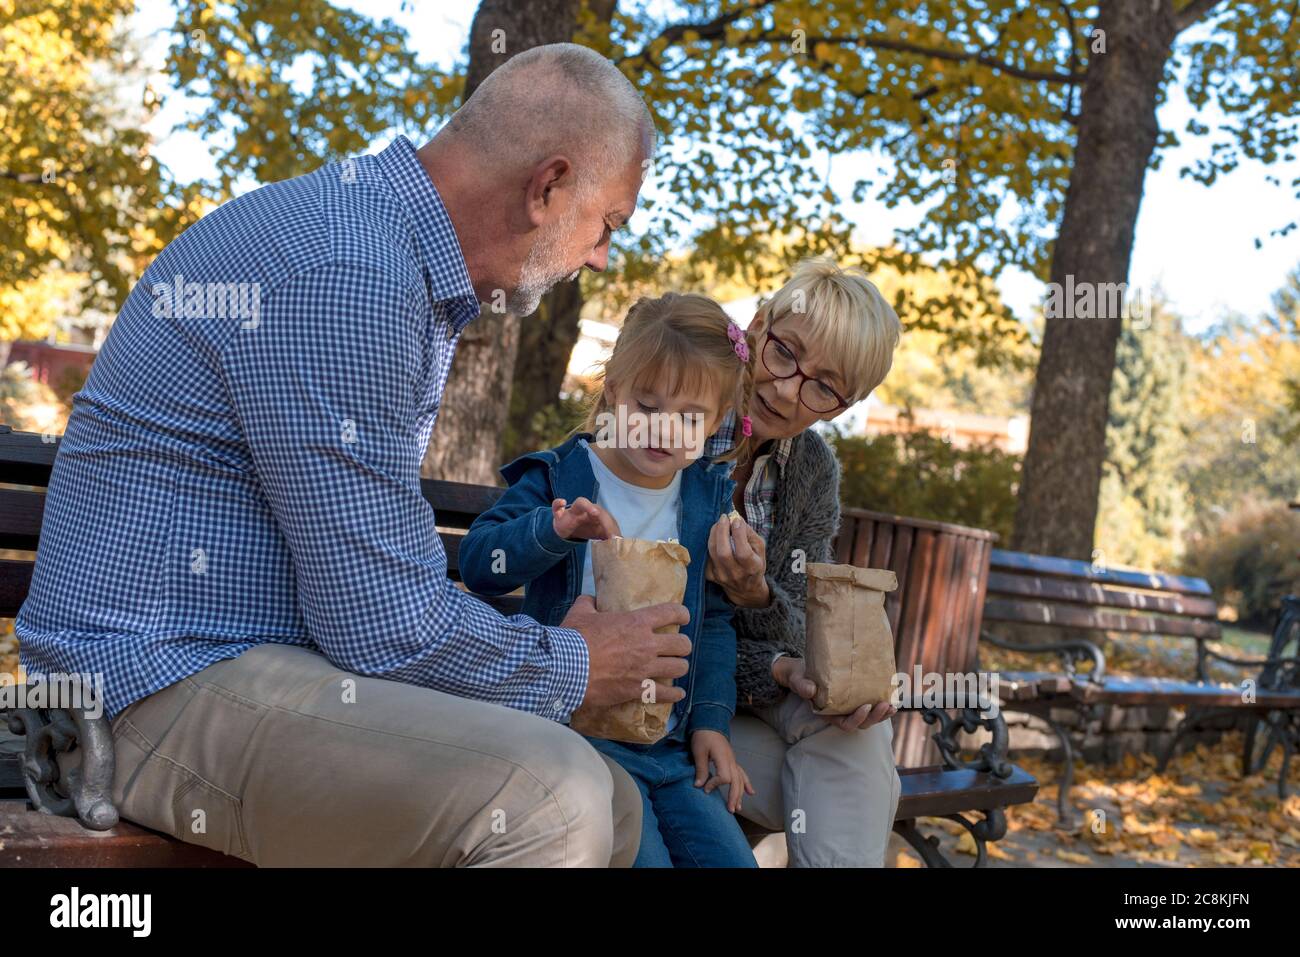 Beautiful picture of grandparents eating popcorn with their grandchild in the park Stock Photo